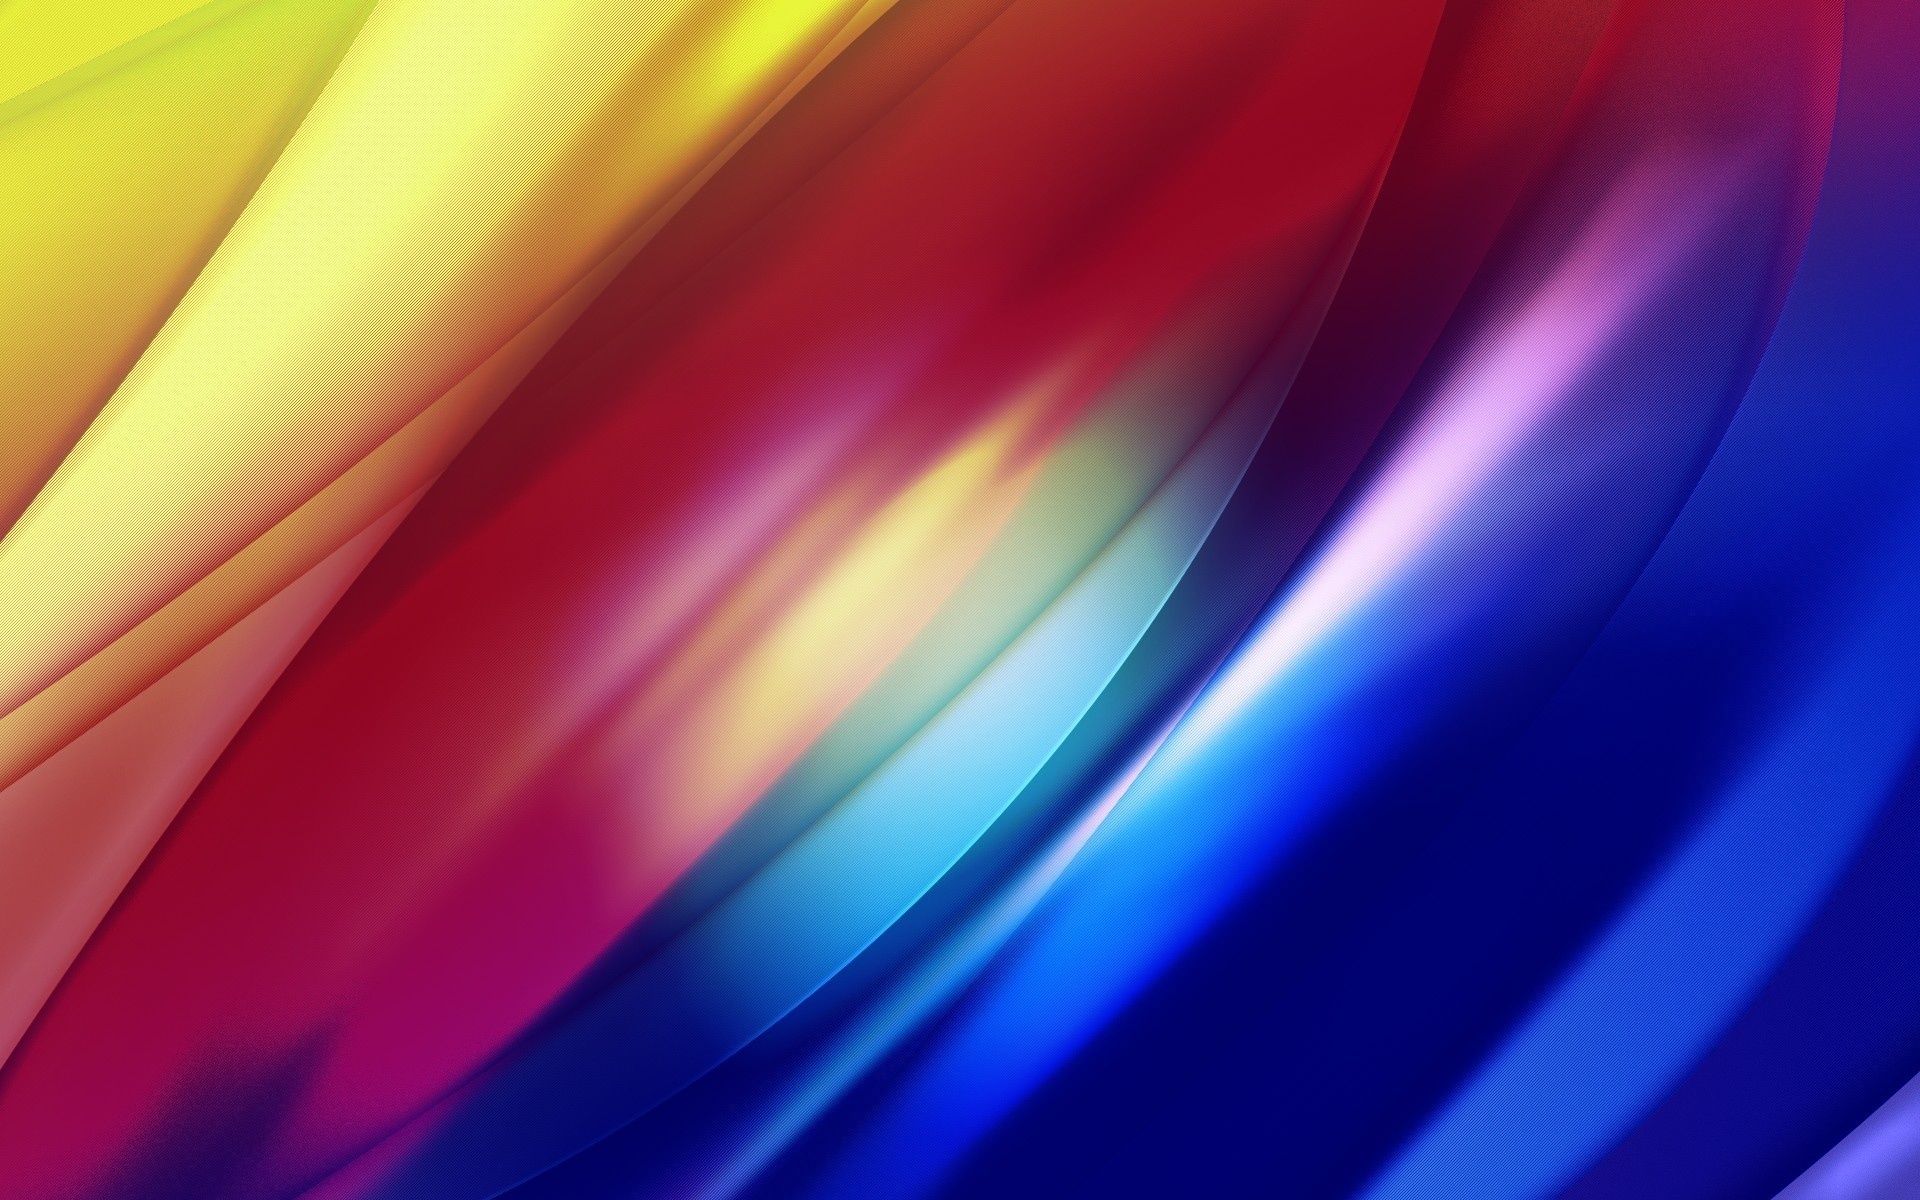 Abstract Wave HD Wallpapers - Wallpaper Cave